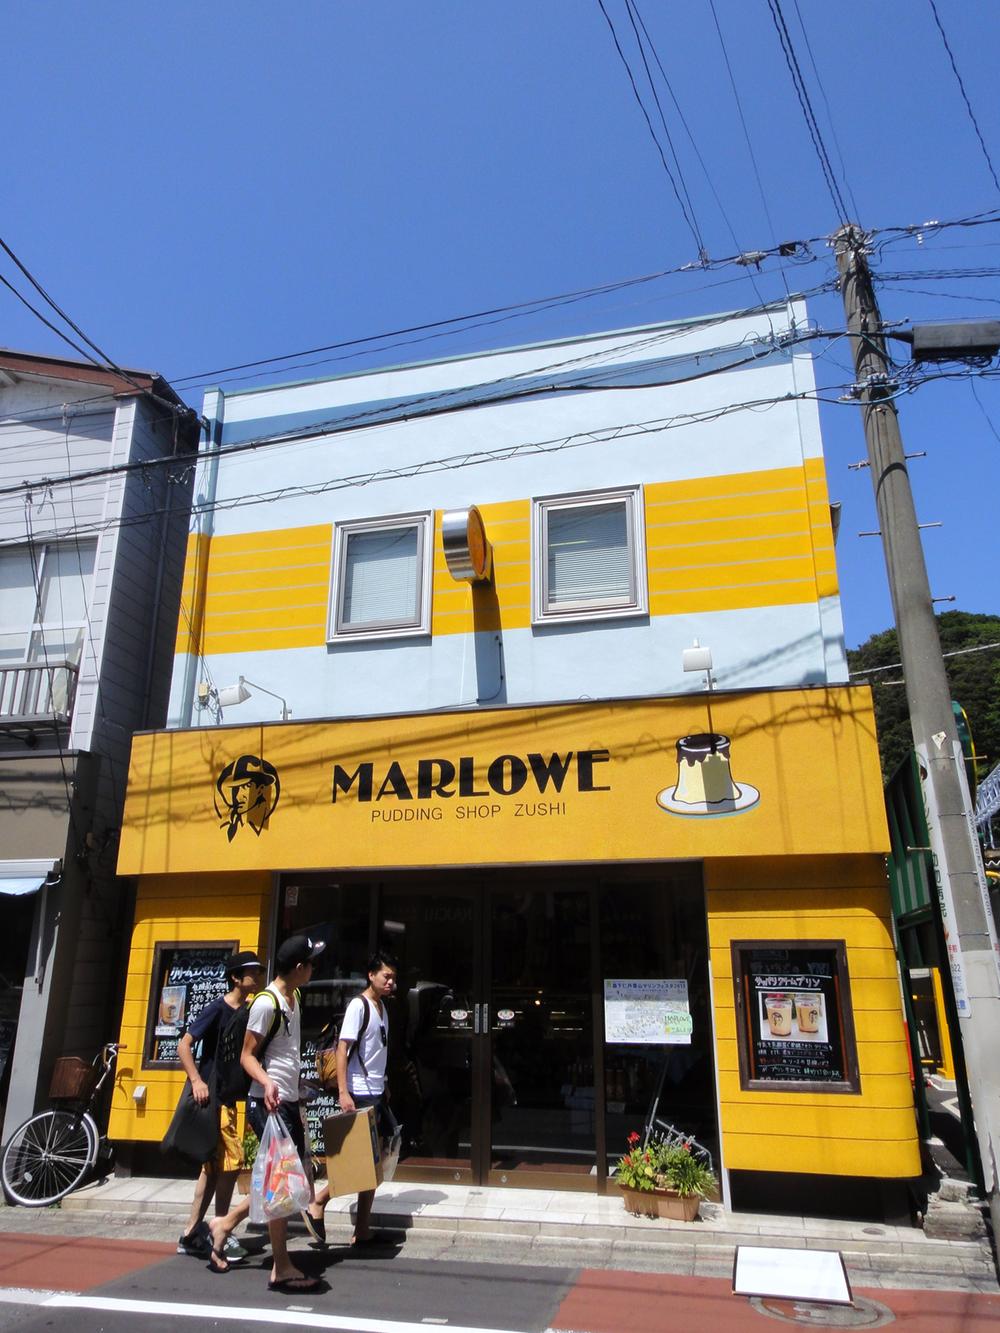 Streets around. Shops of the famous pudding in the 680m Shonan to Marlow.